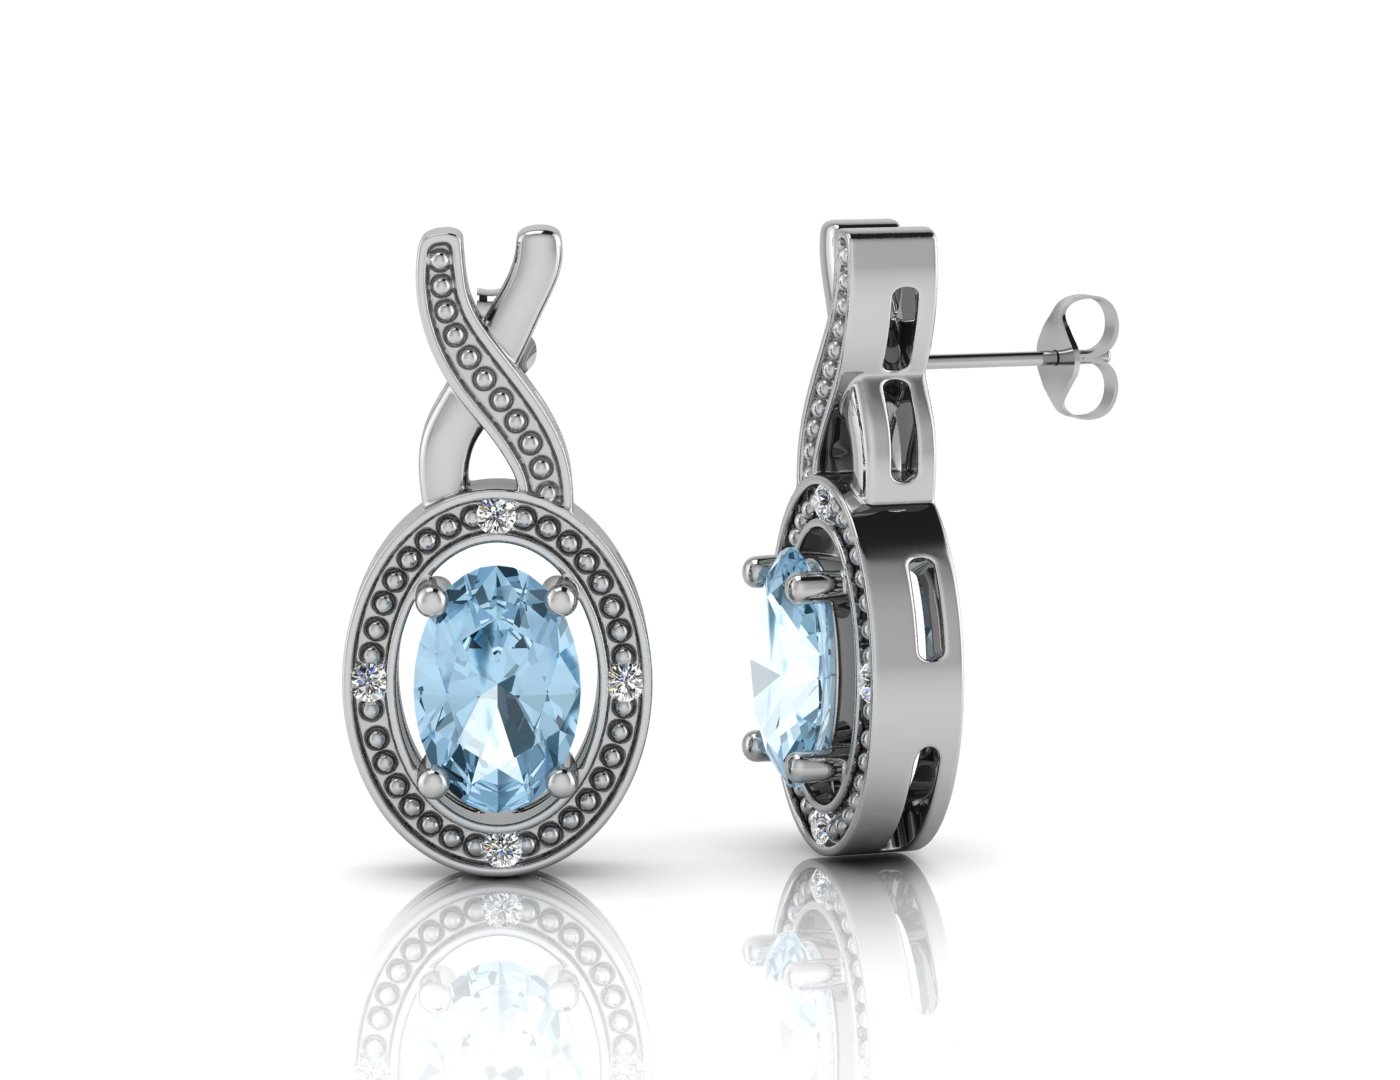 9ct White Gold Diamond and Blue Topaz Earrings - Image 3 of 4